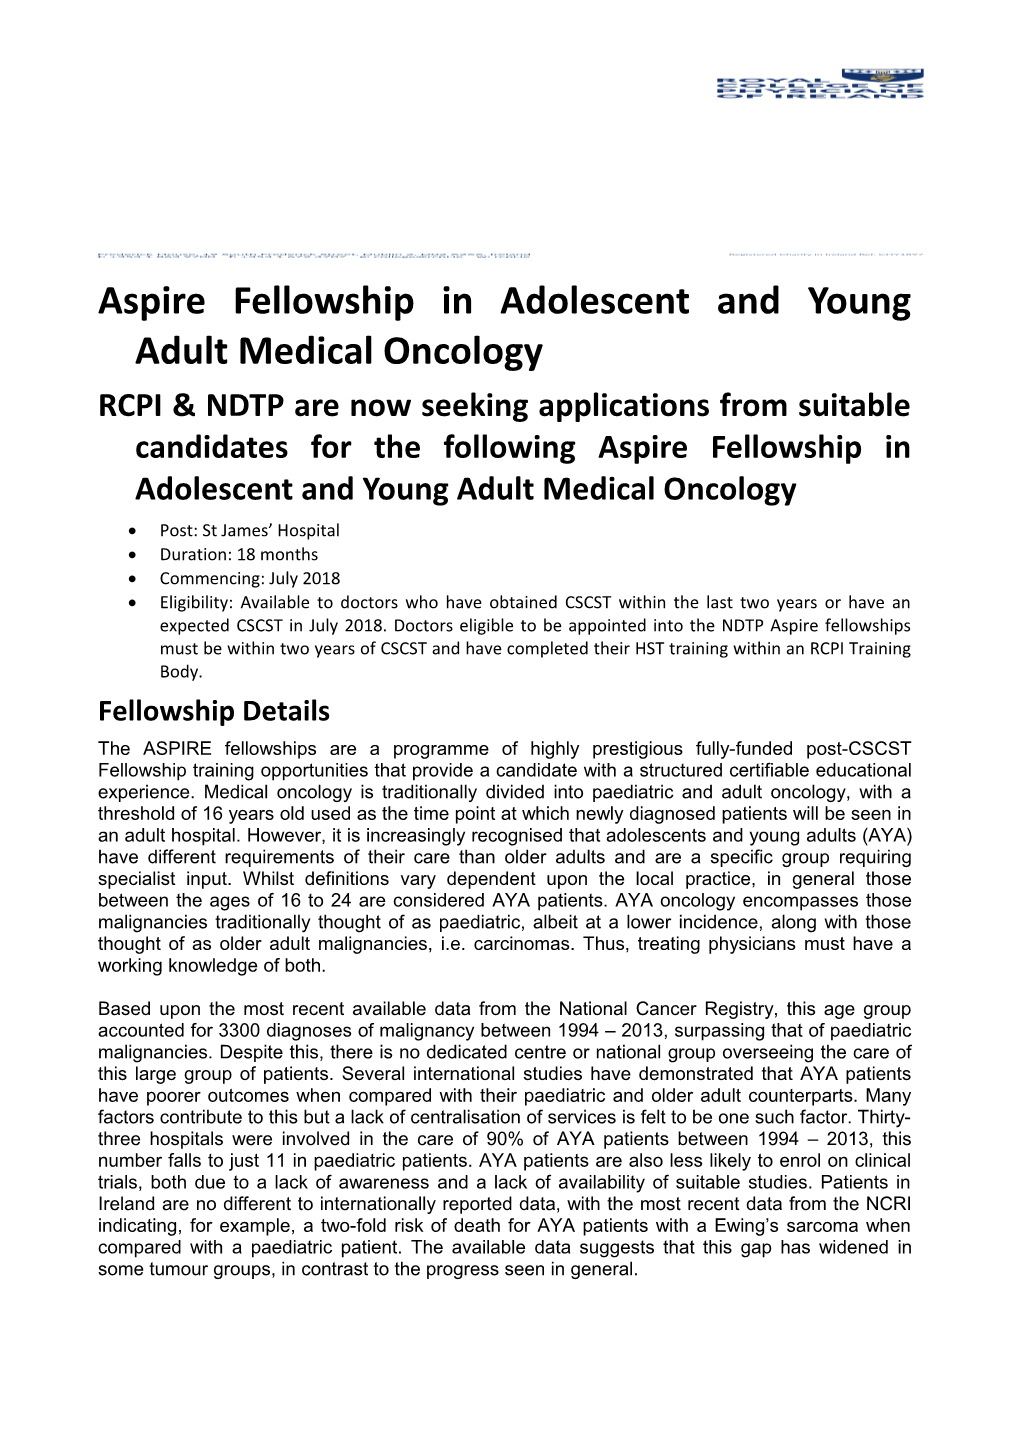 Aspire Fellowship in Adolescent and Young Adult Medical Oncology